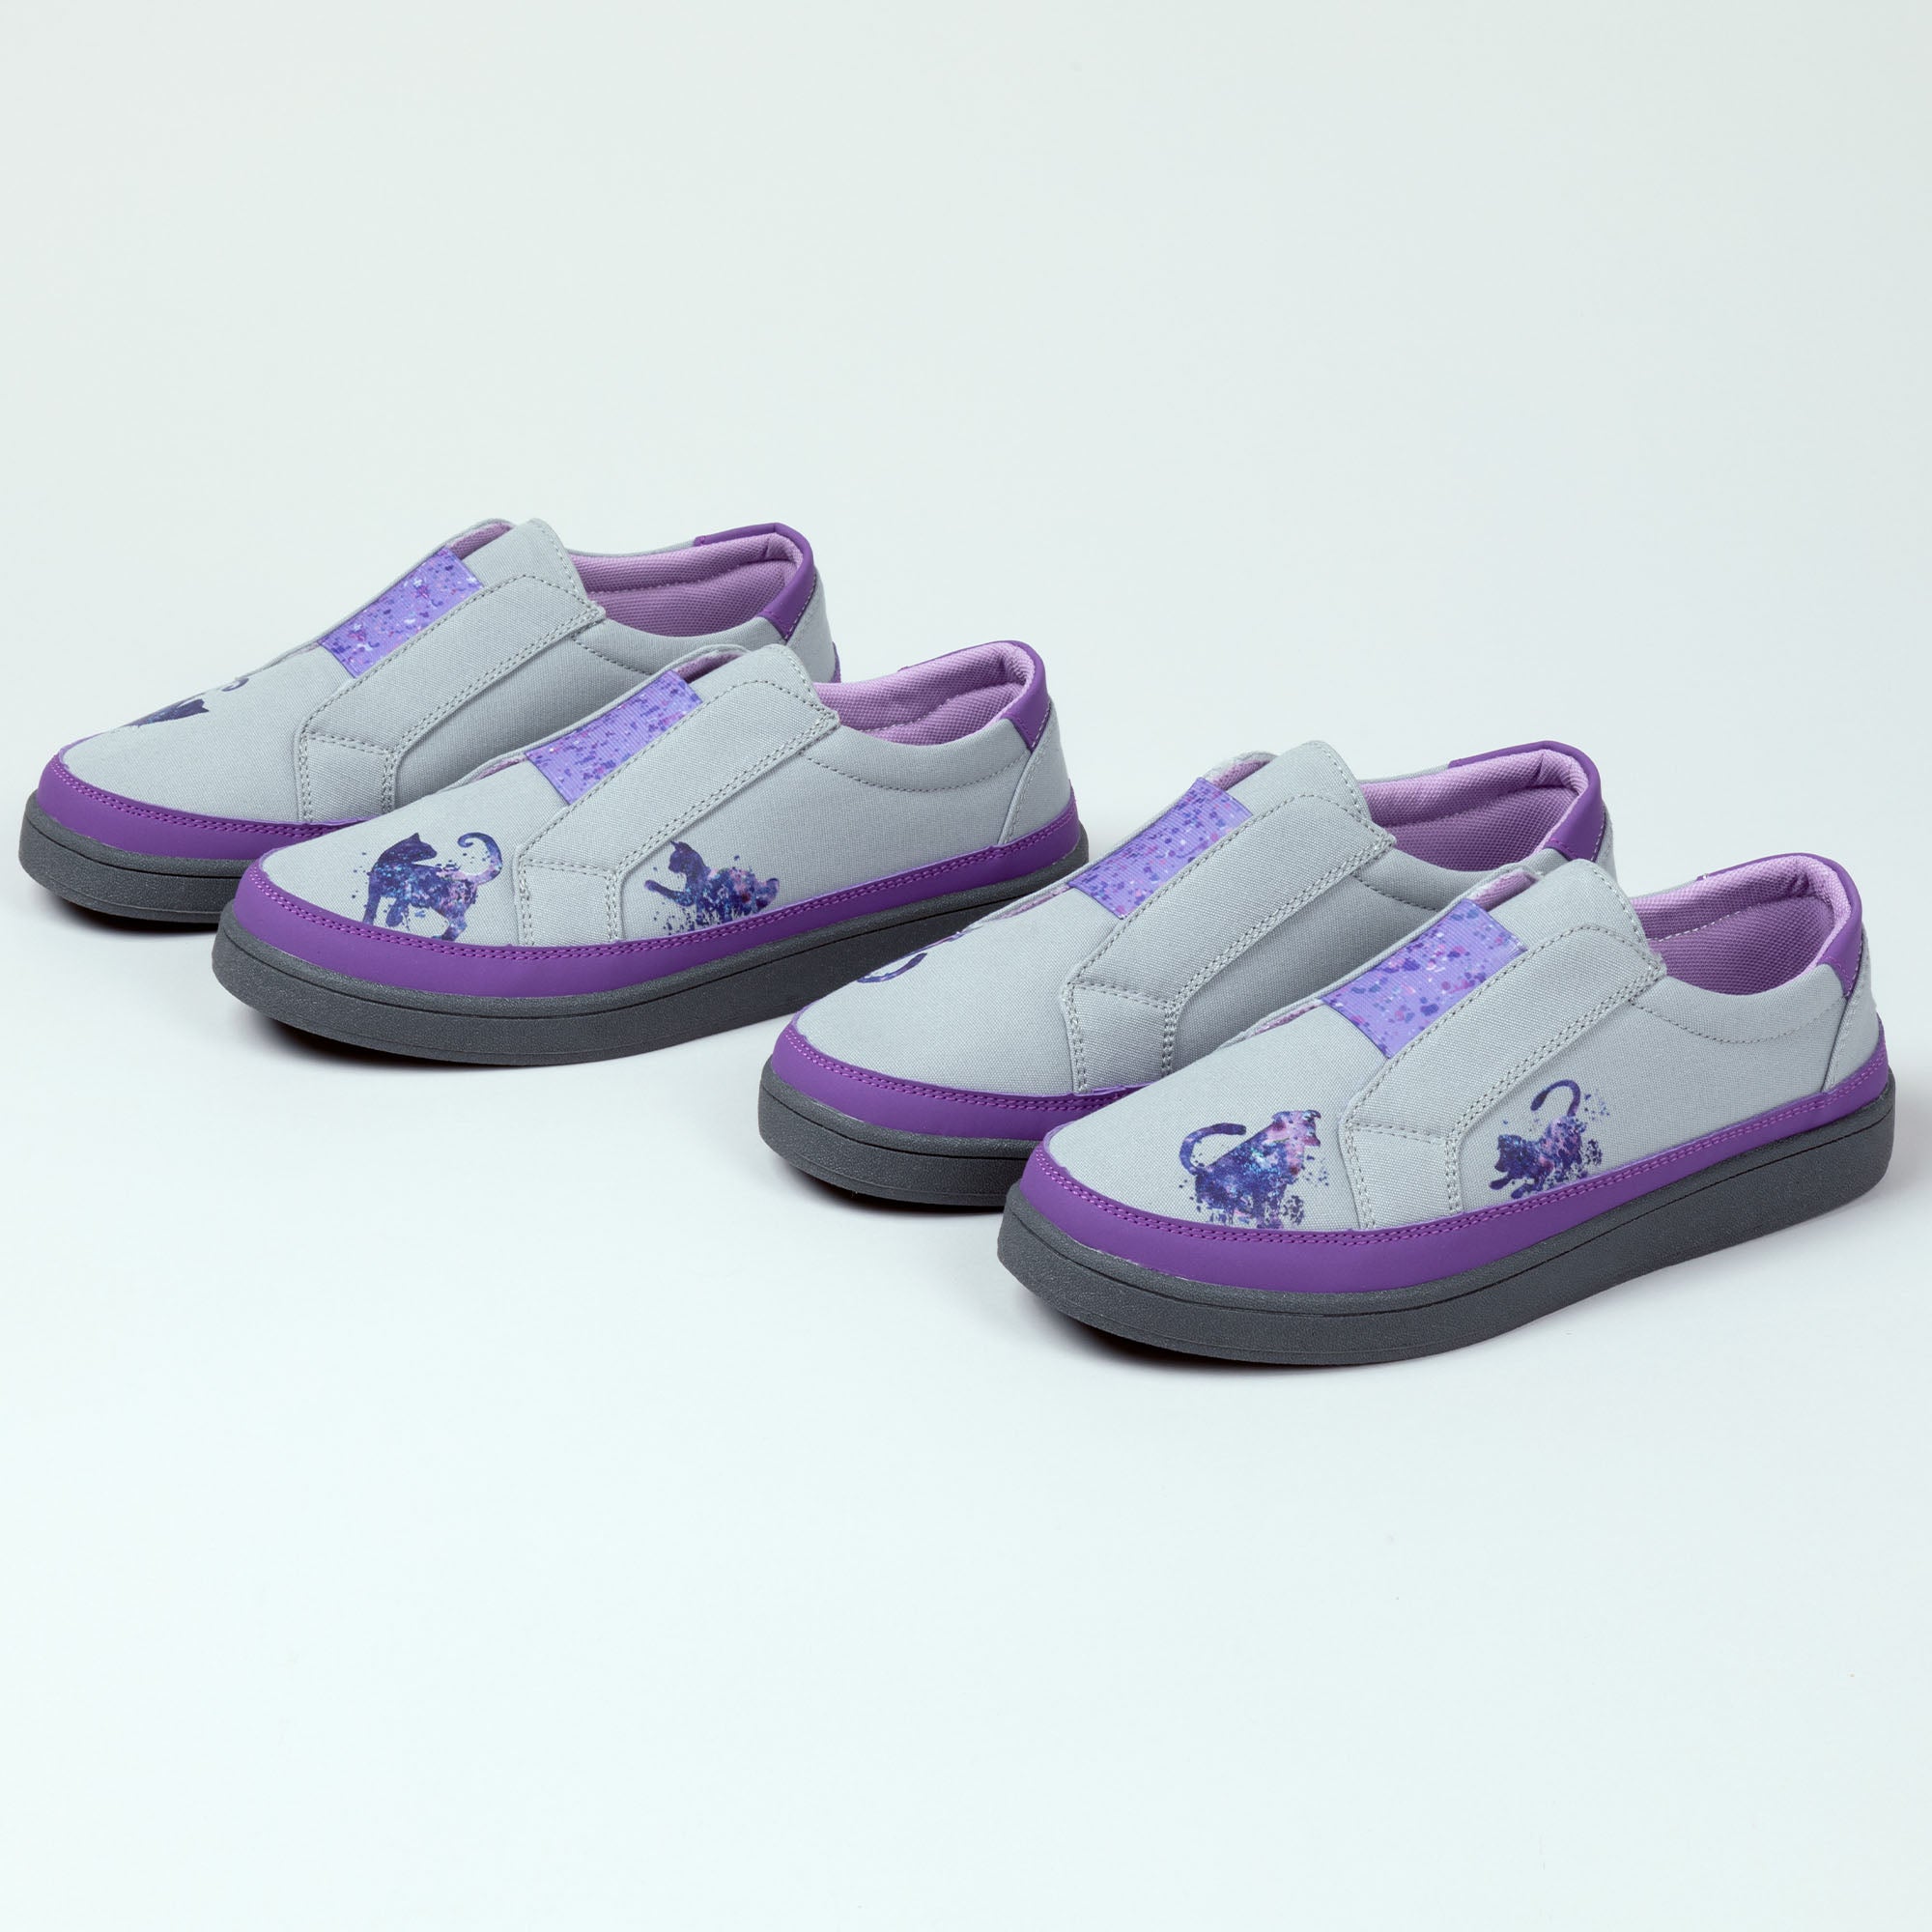 Playful Pets Slip-On Canvas Sneakers - Cat - 6